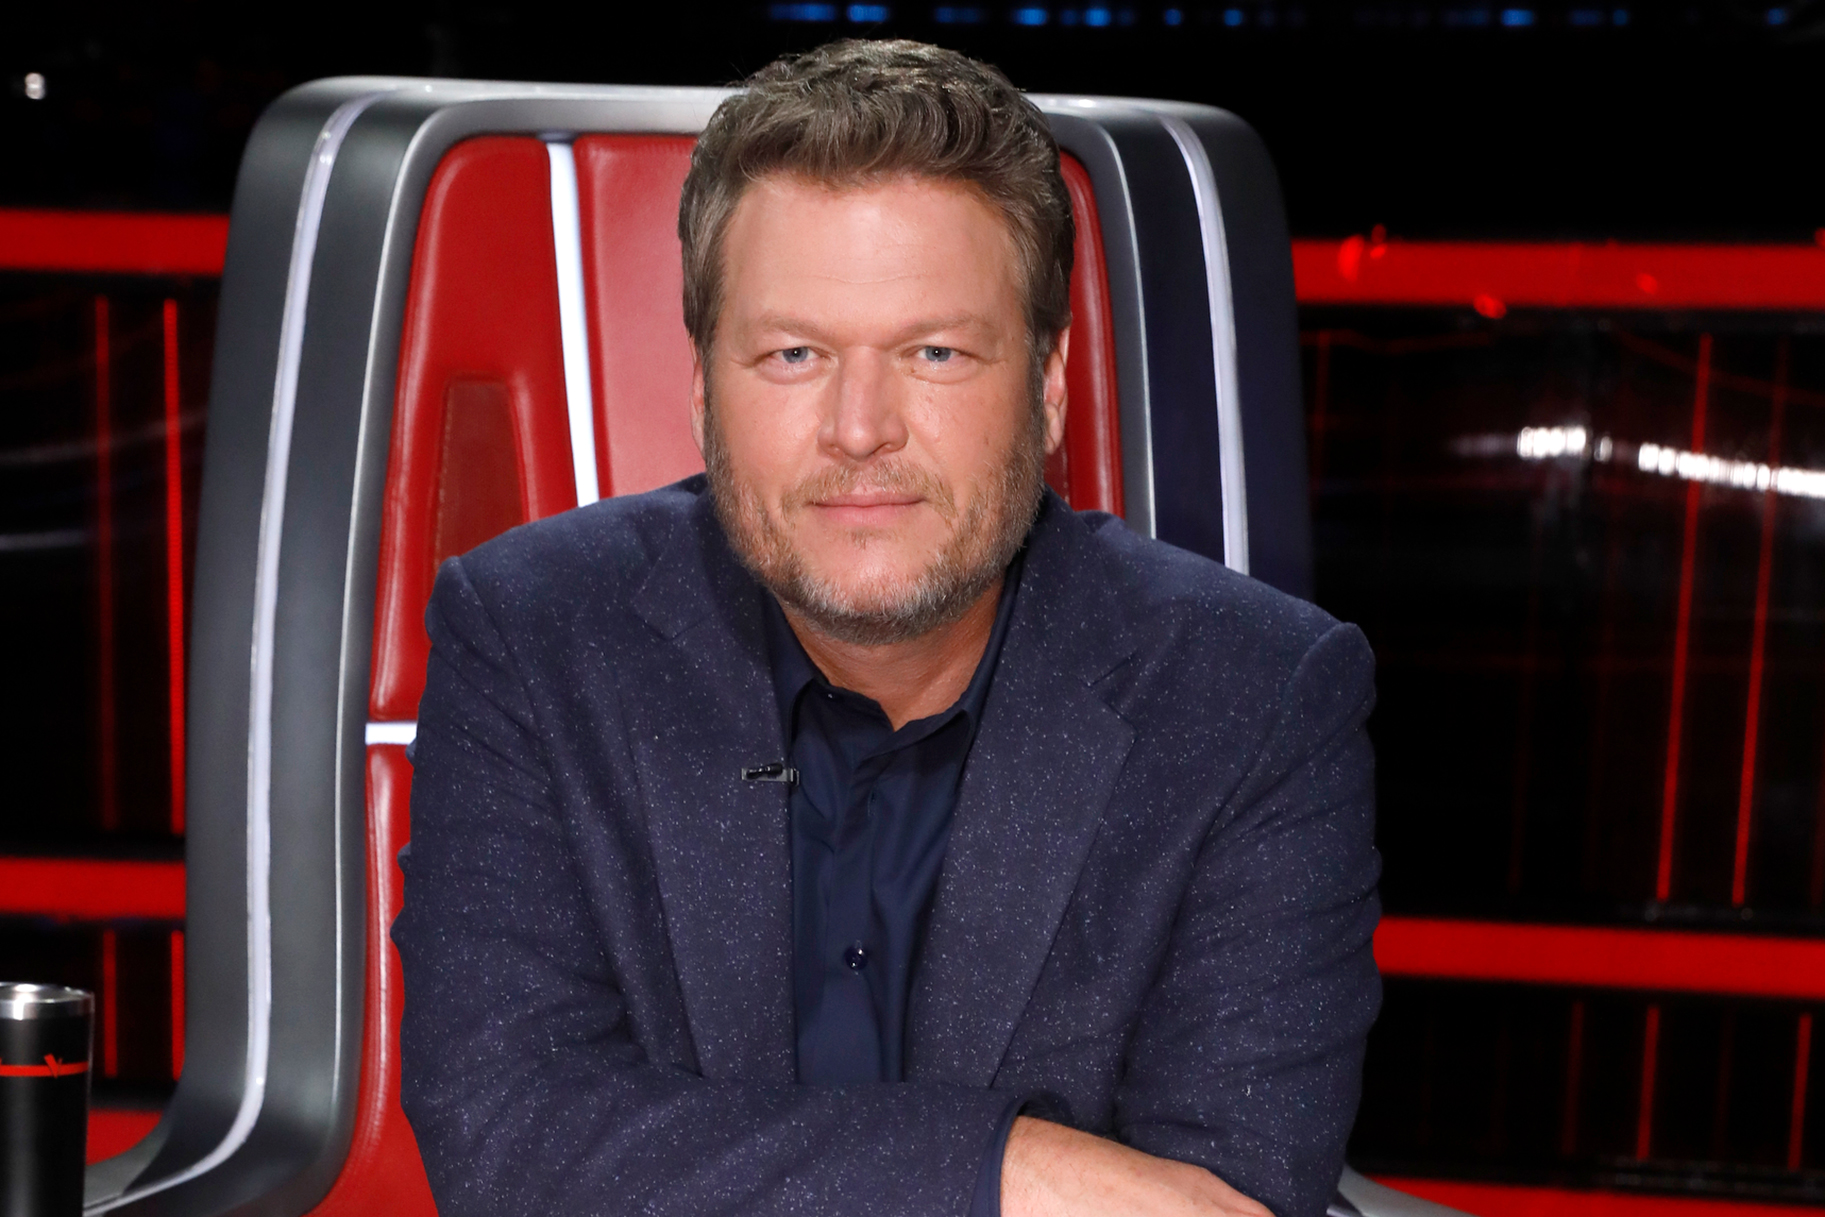 Where is Blake Shelton from?